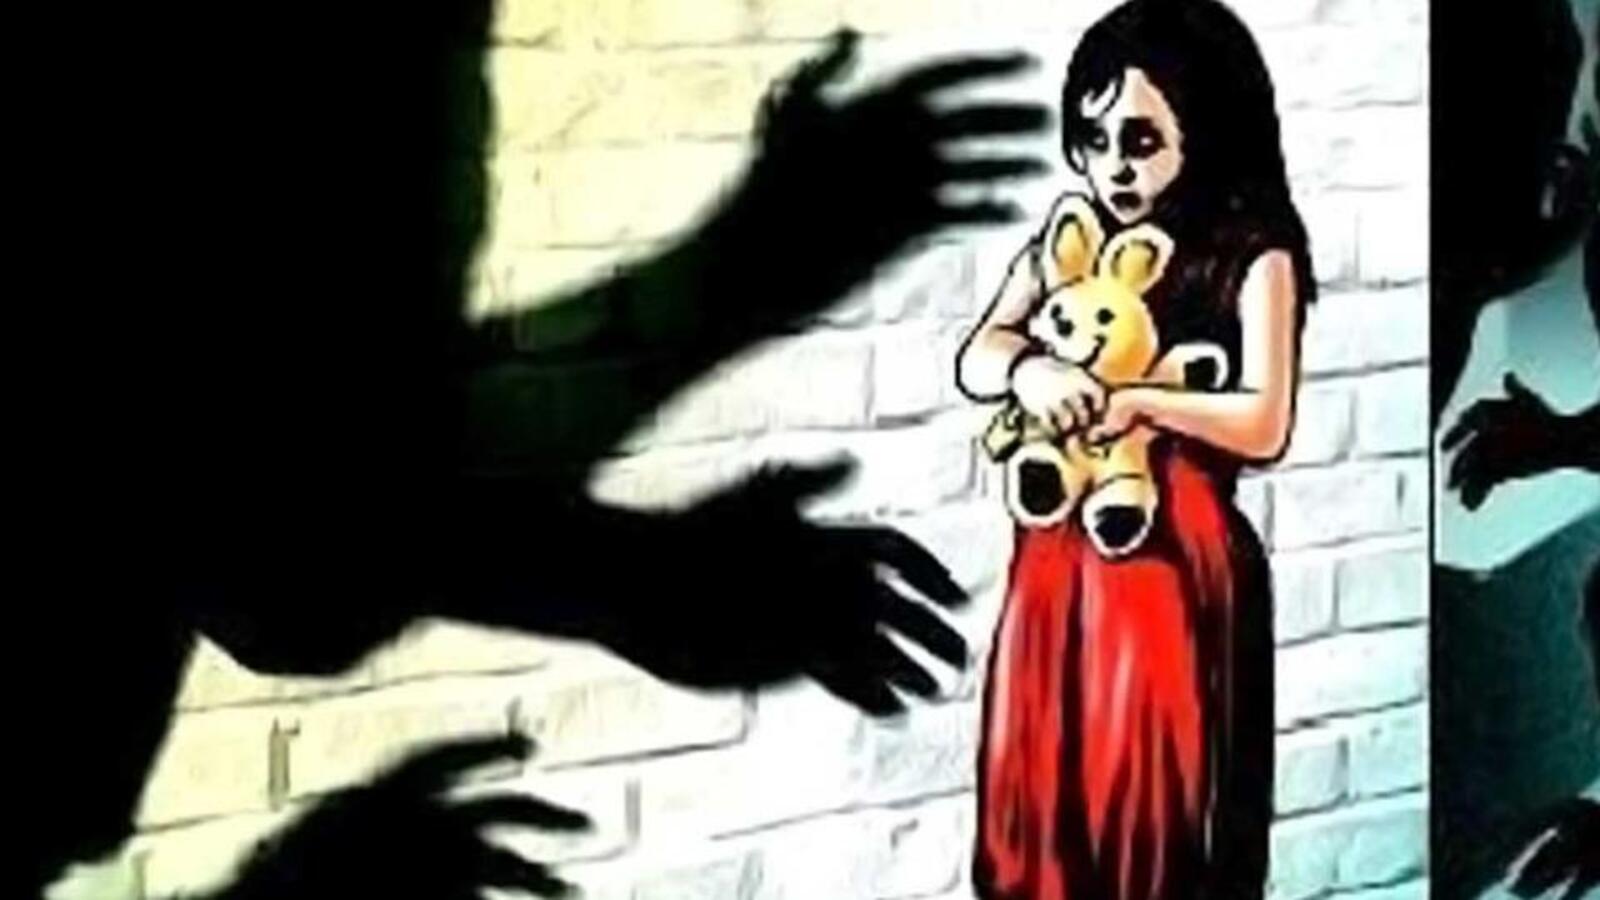 4 of 5 juveniles arrested for Hyderabad girl's gang rape in car get bail,  freed | Latest News India - Hindustan Times